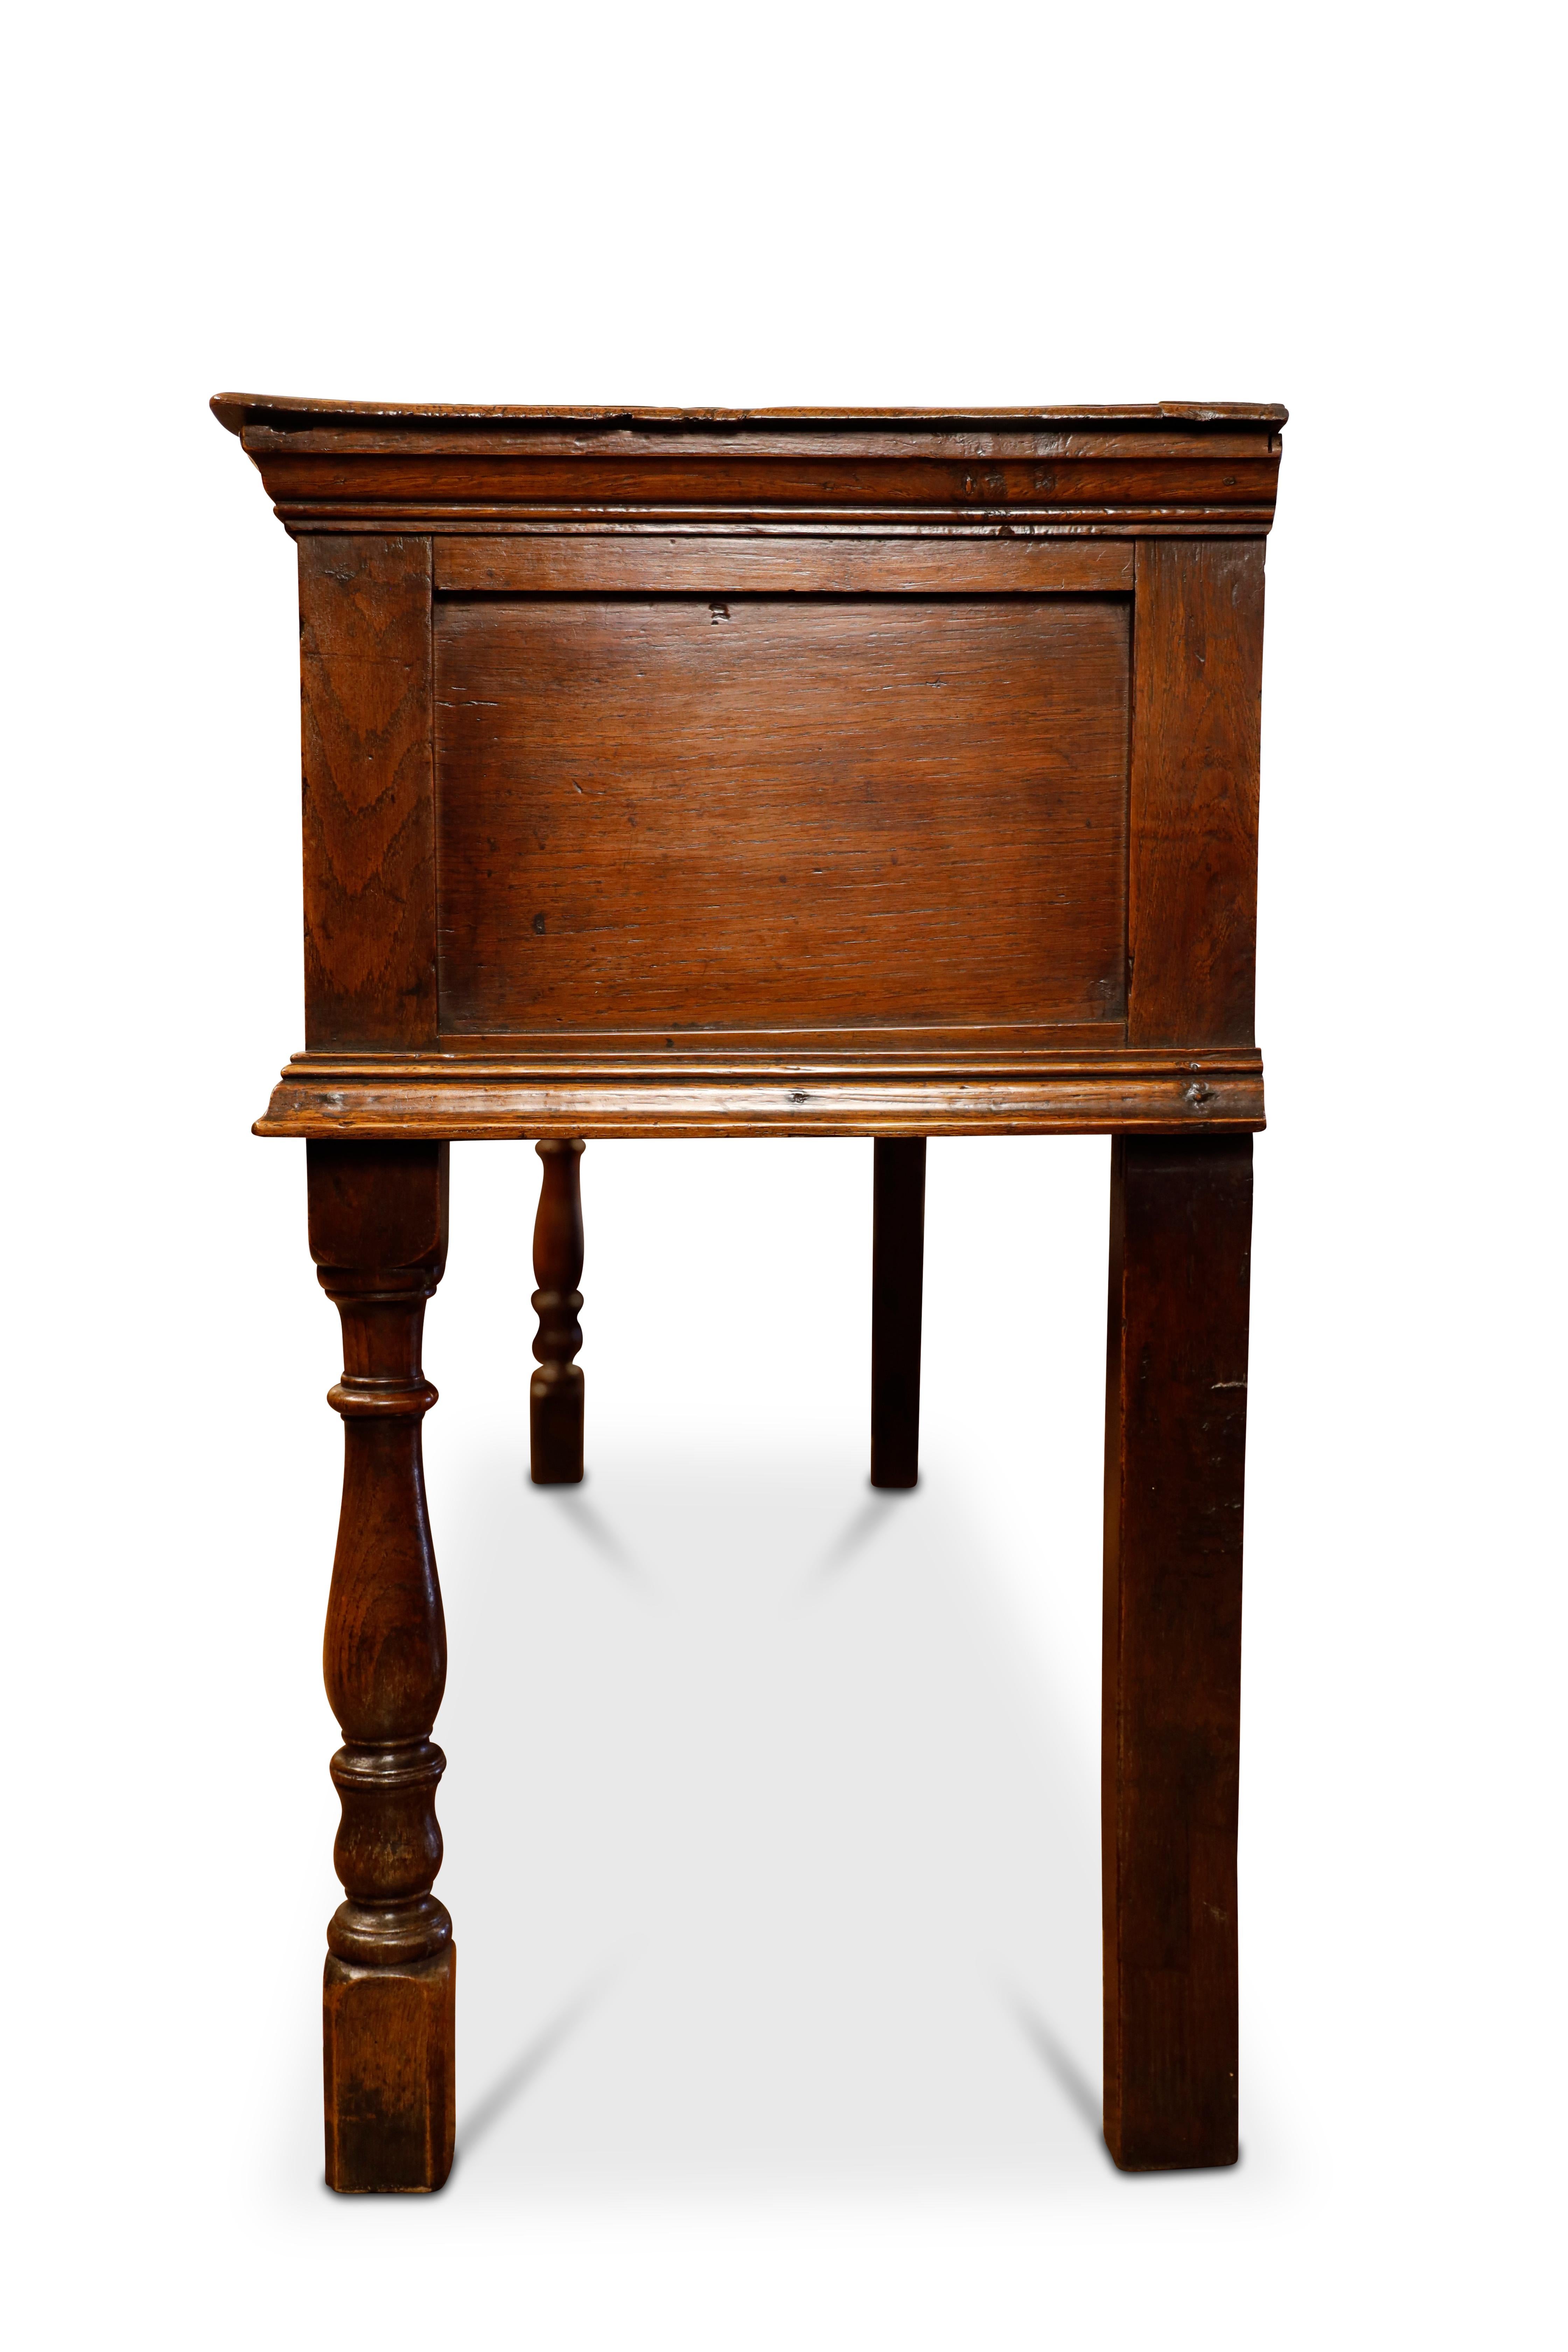 George III oak dresser base with three drawers, turned front legs with fret corner brackets; straight back legs.